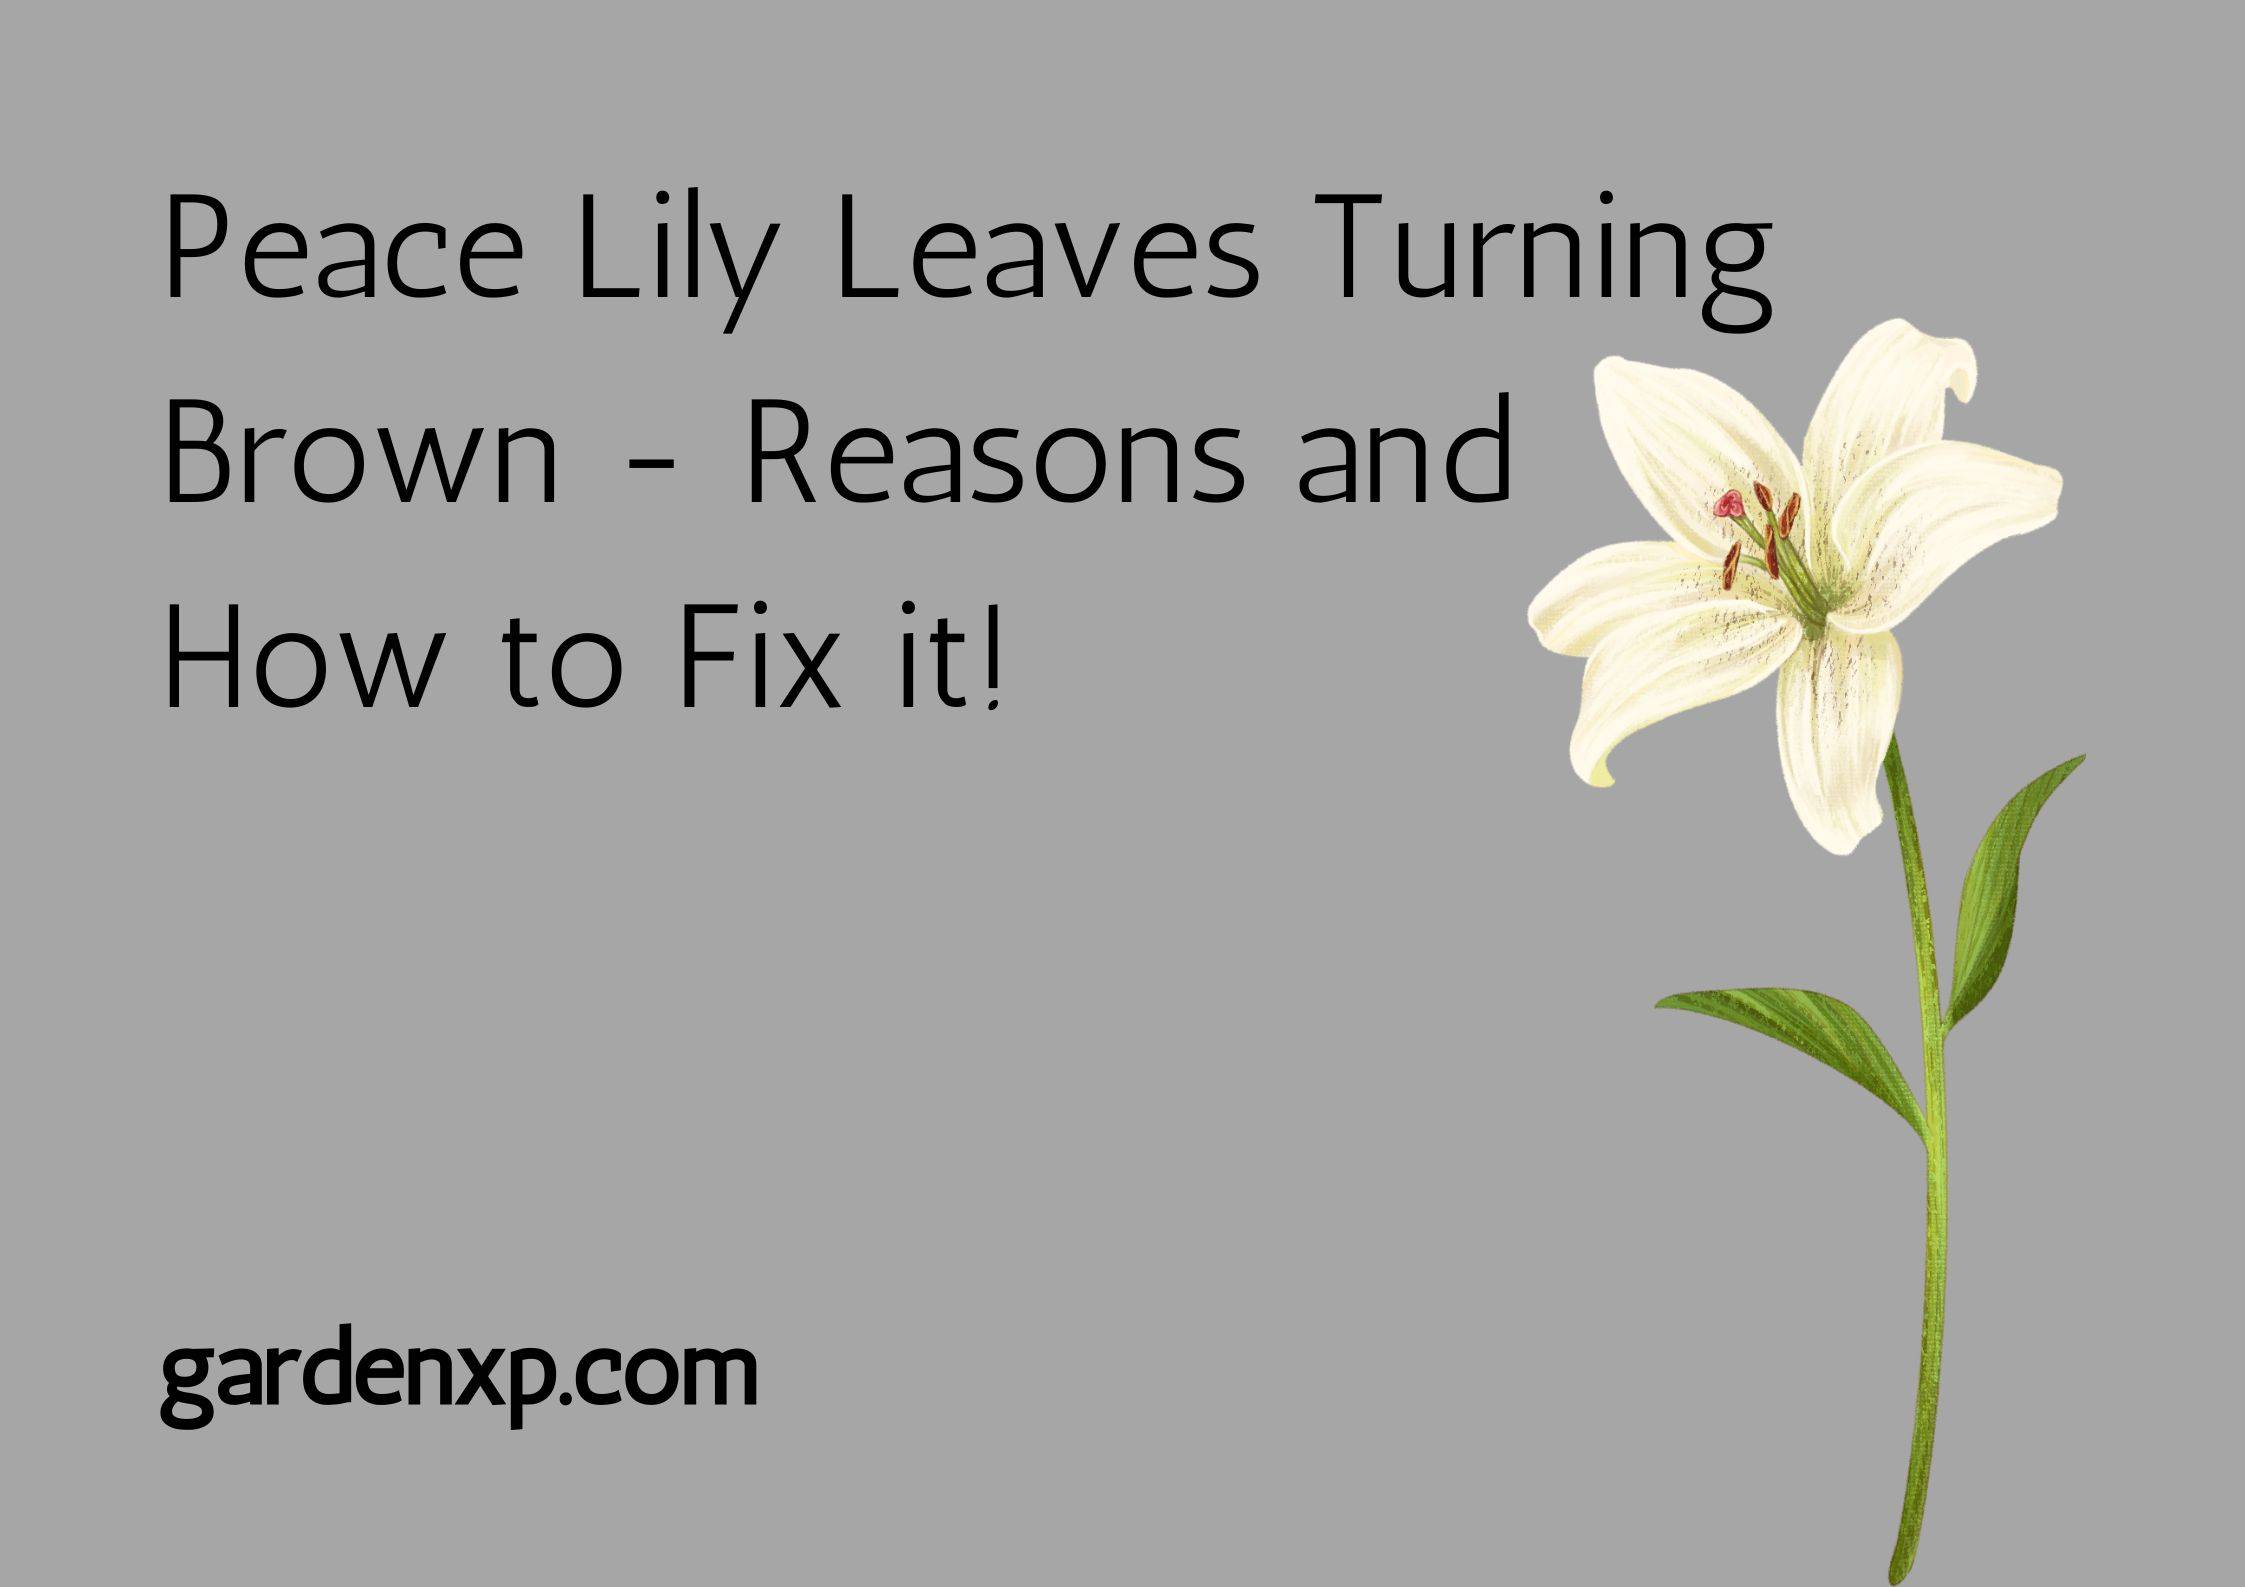 Peace Lily Leaves Turning Brown - Reasons and How to Fix it!